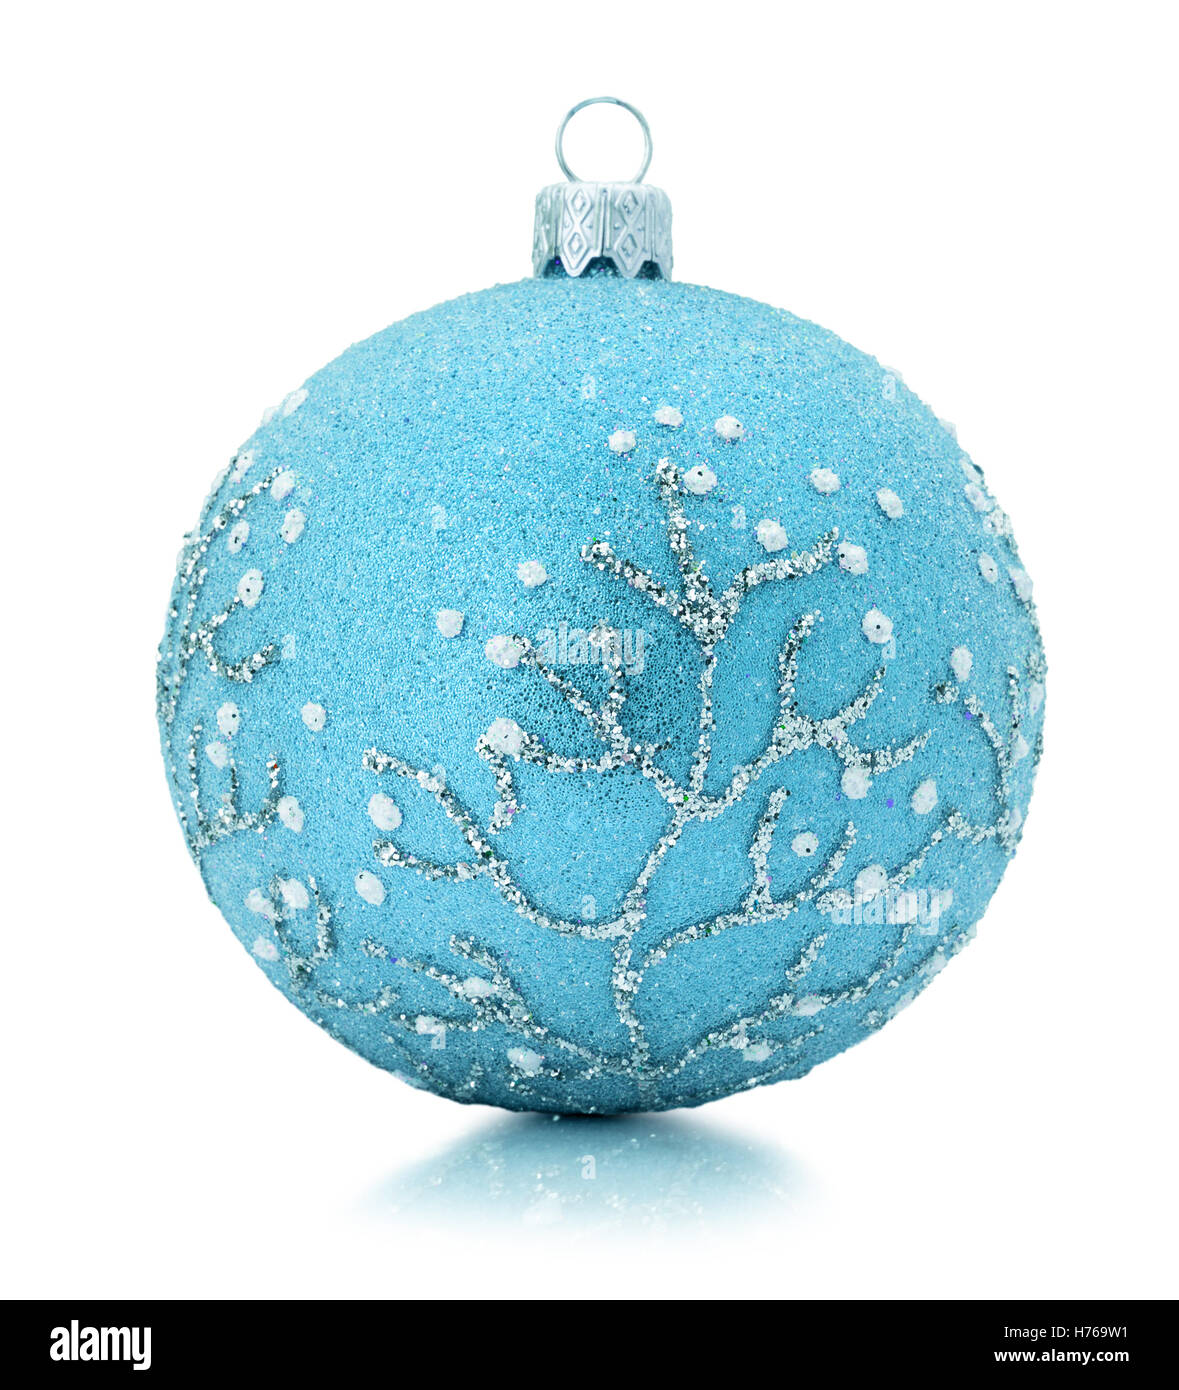 blue Christmas tree ball isolated on the white background. Stock Photo